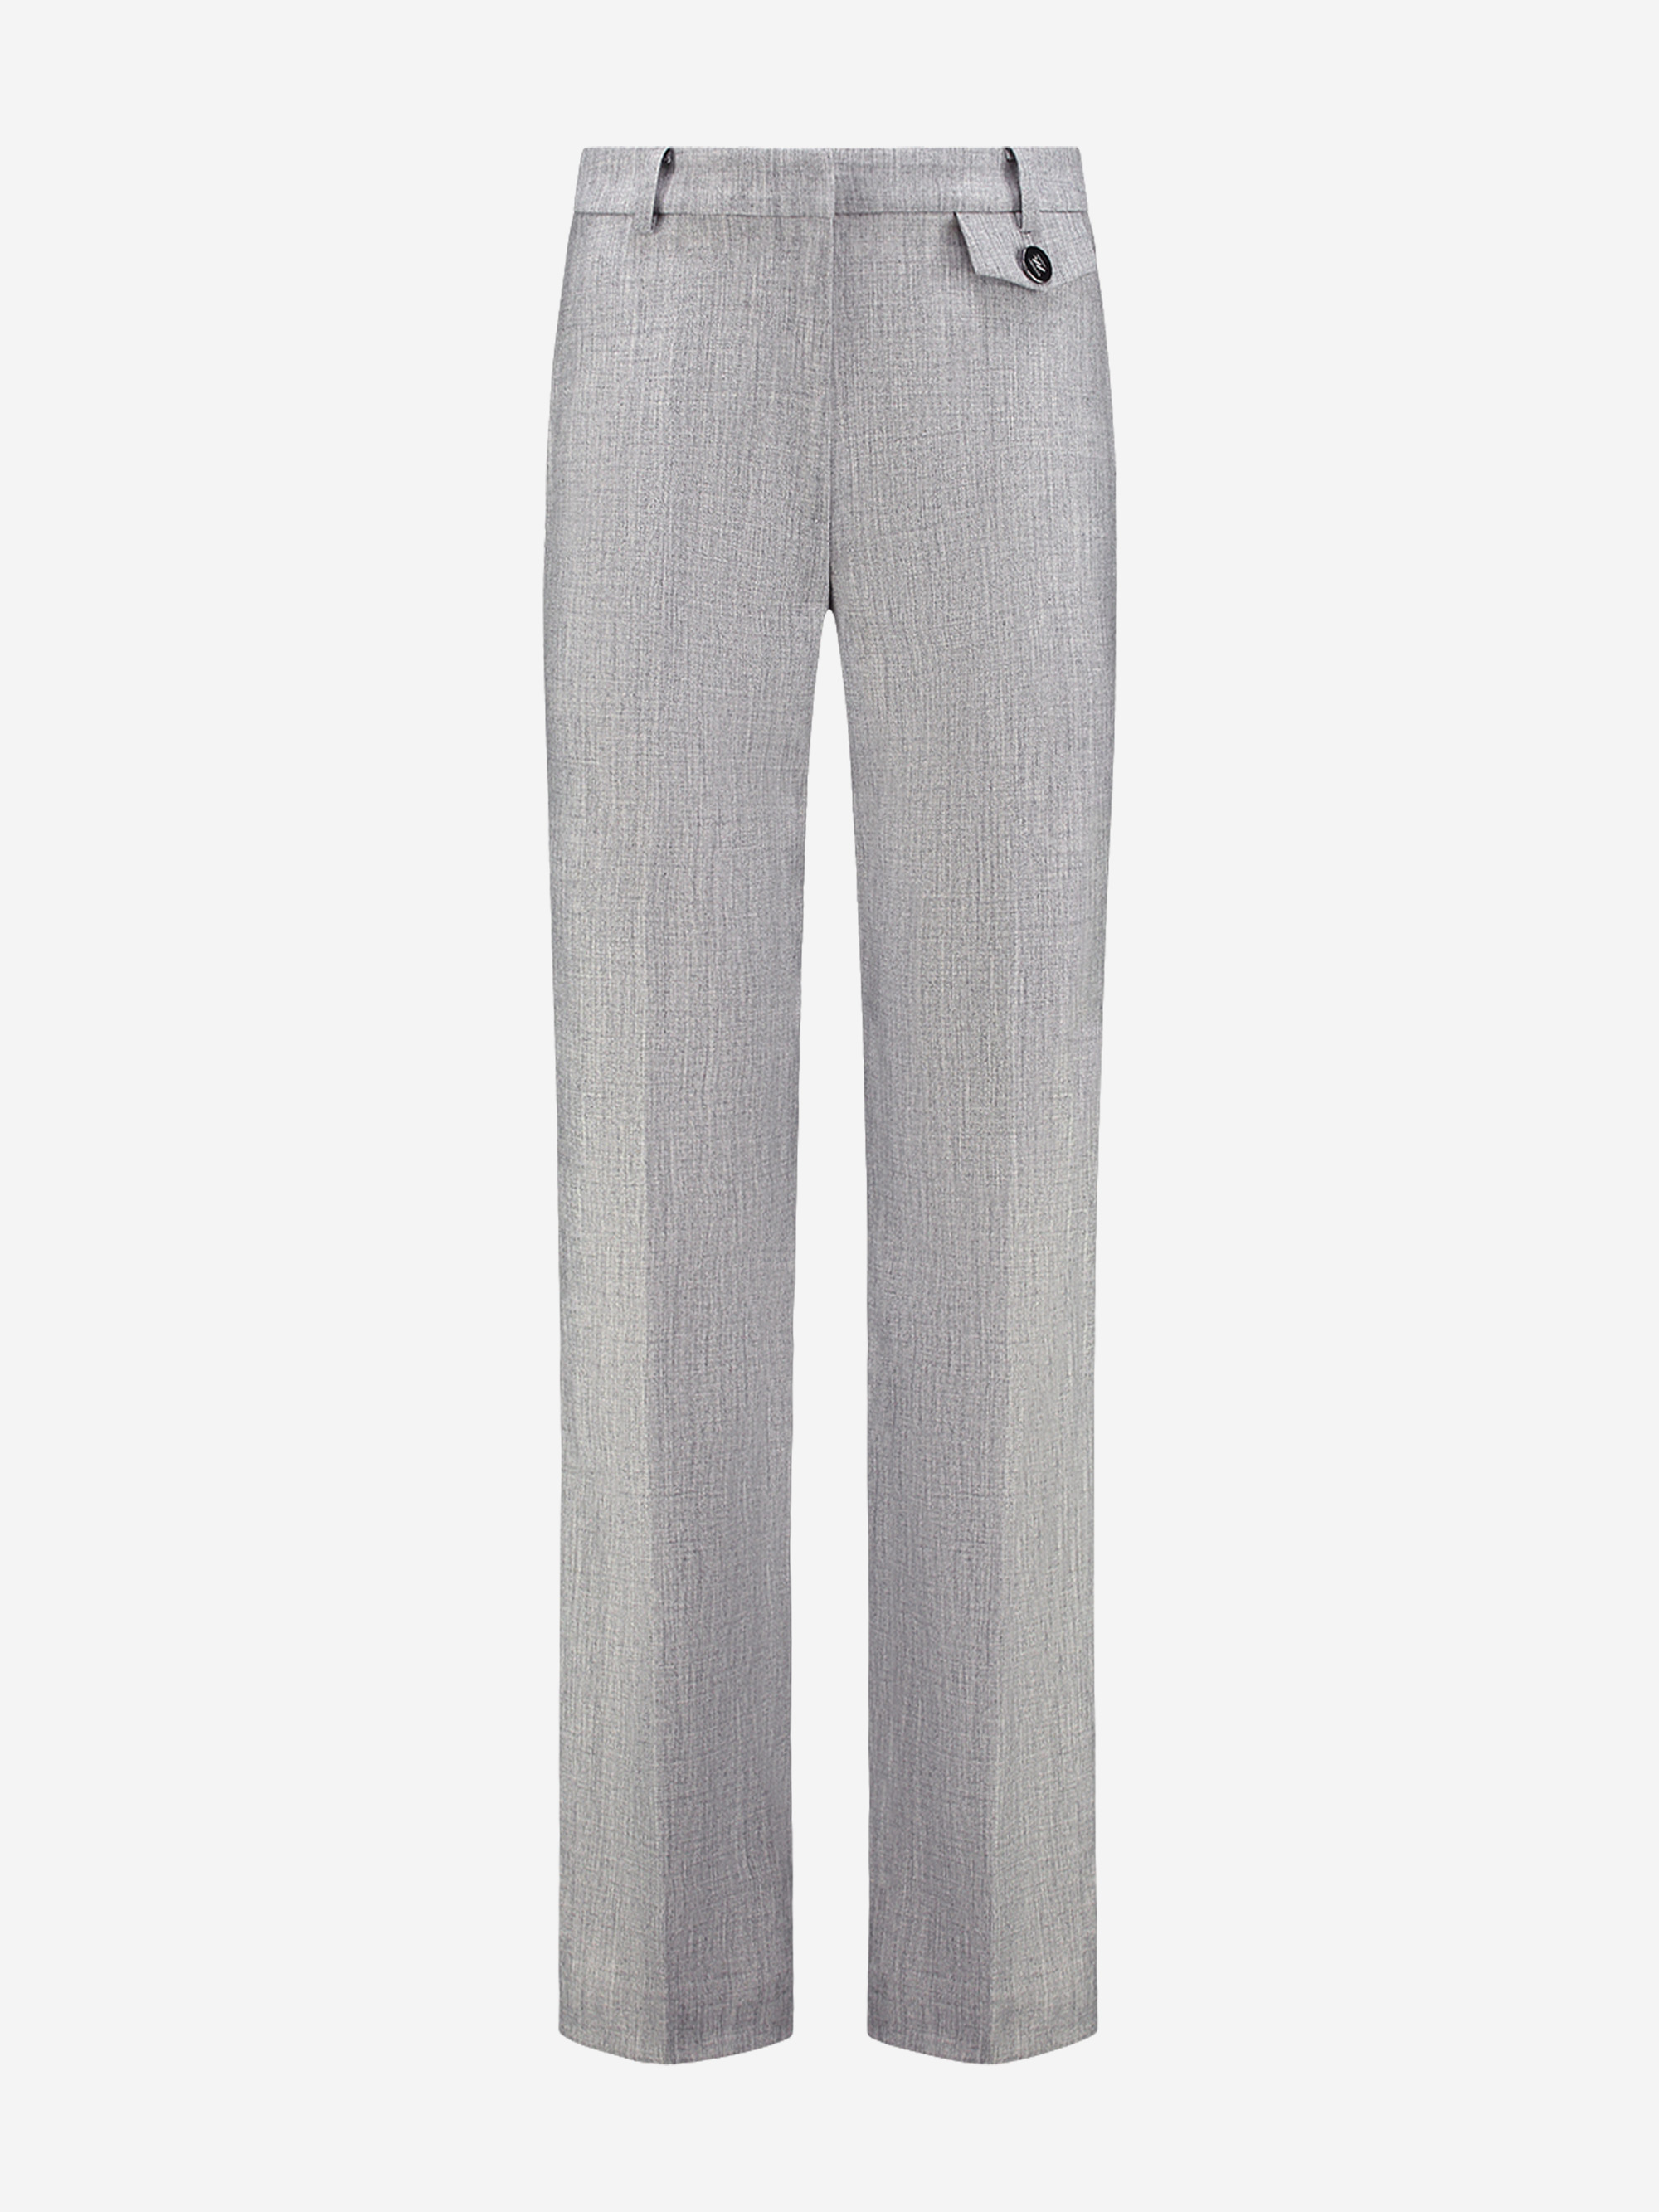 Straight Melange pants with Mid rise